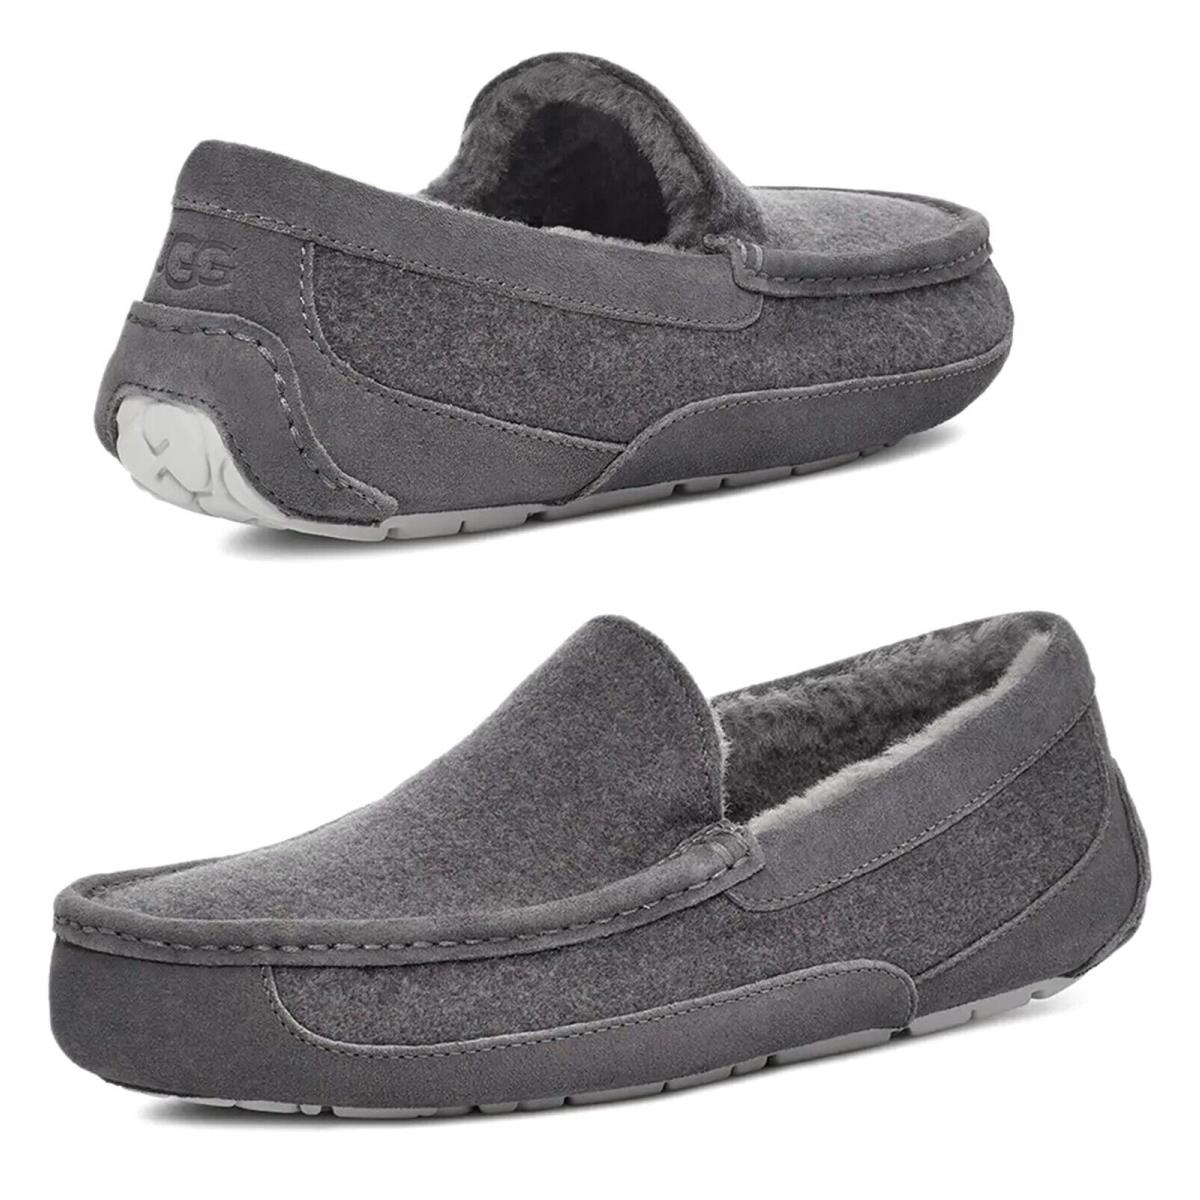 Ugg Men`s Ascot Wool Suede Slippers Moccasin Loafers Shoes Grey Size 8